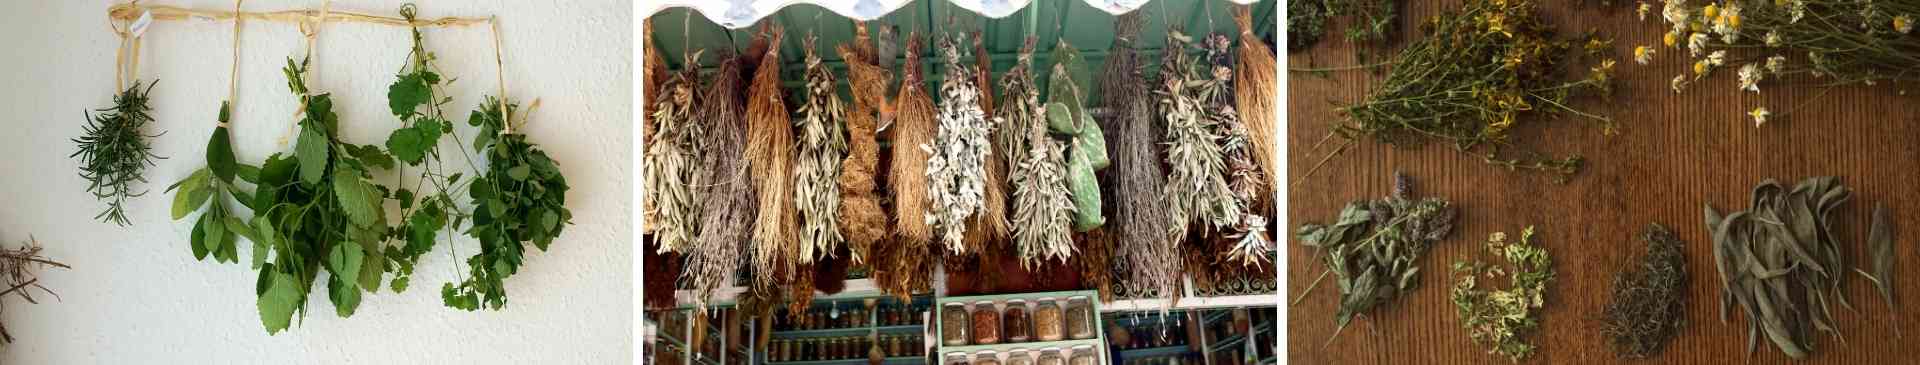 Harvesting and Drying Herbs for Winter